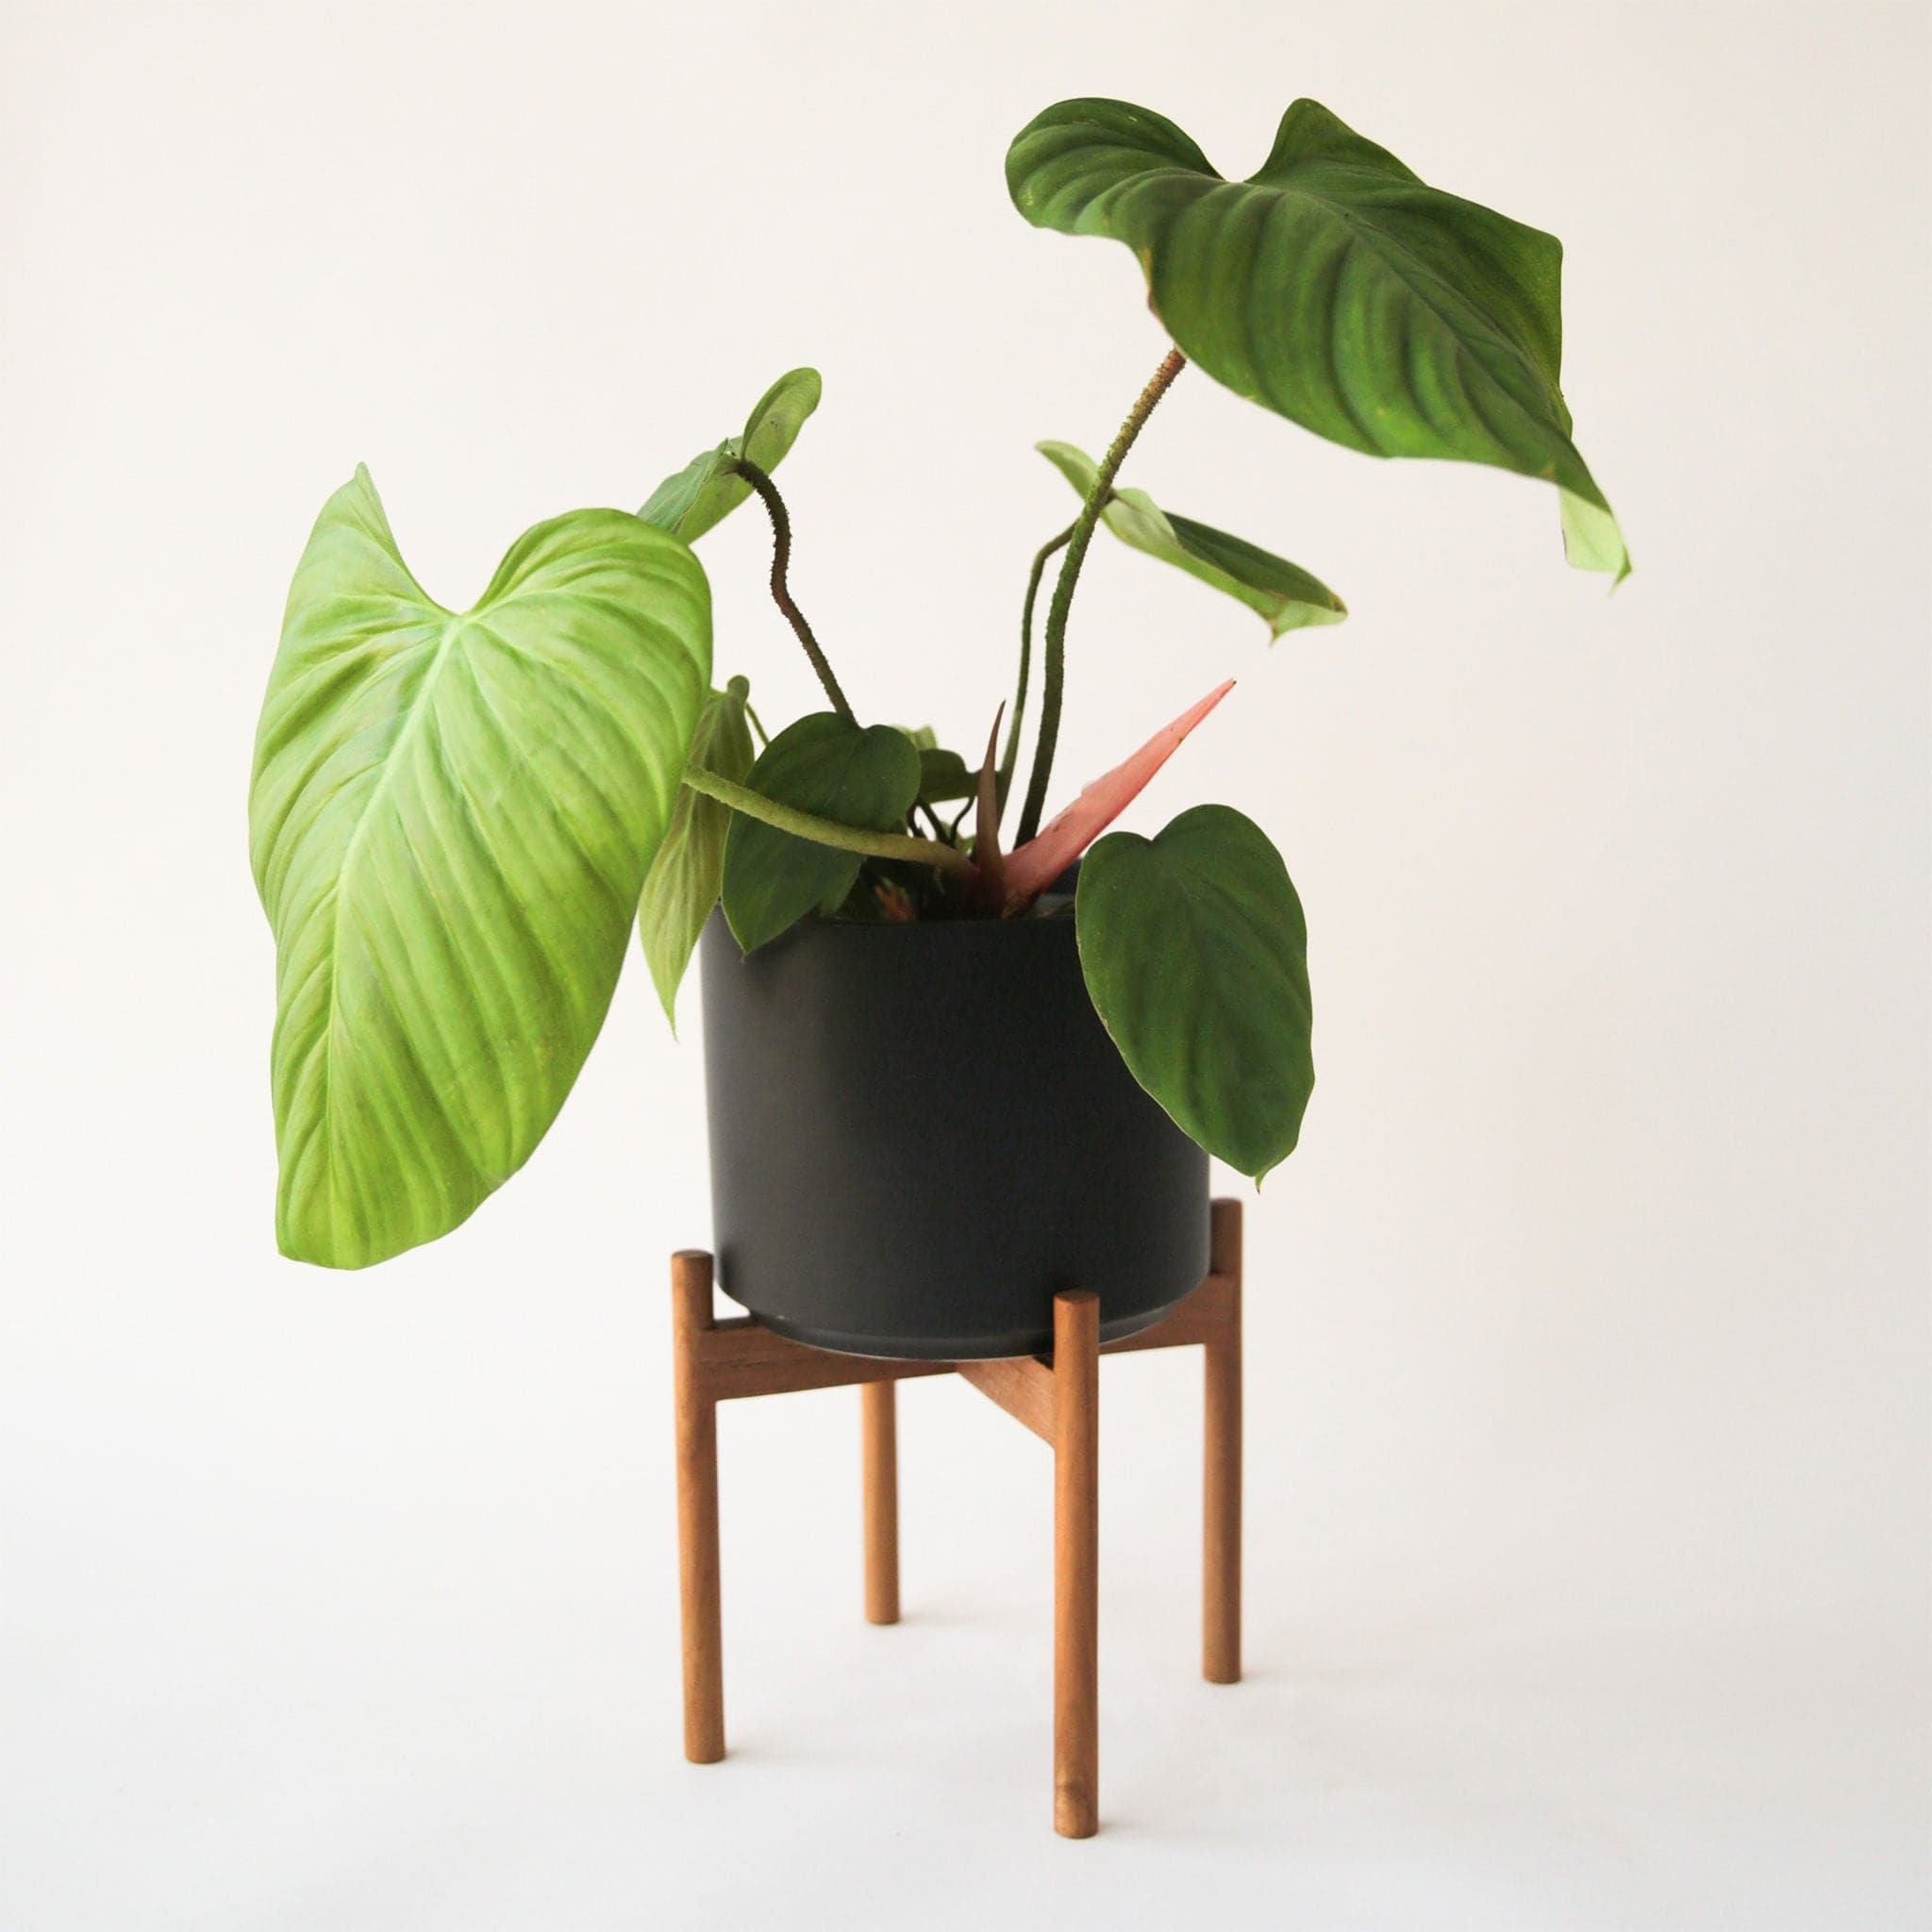 A black ceramic pot on a wooden stand with four legs and filled with a green leafy plant that is sold separately. 